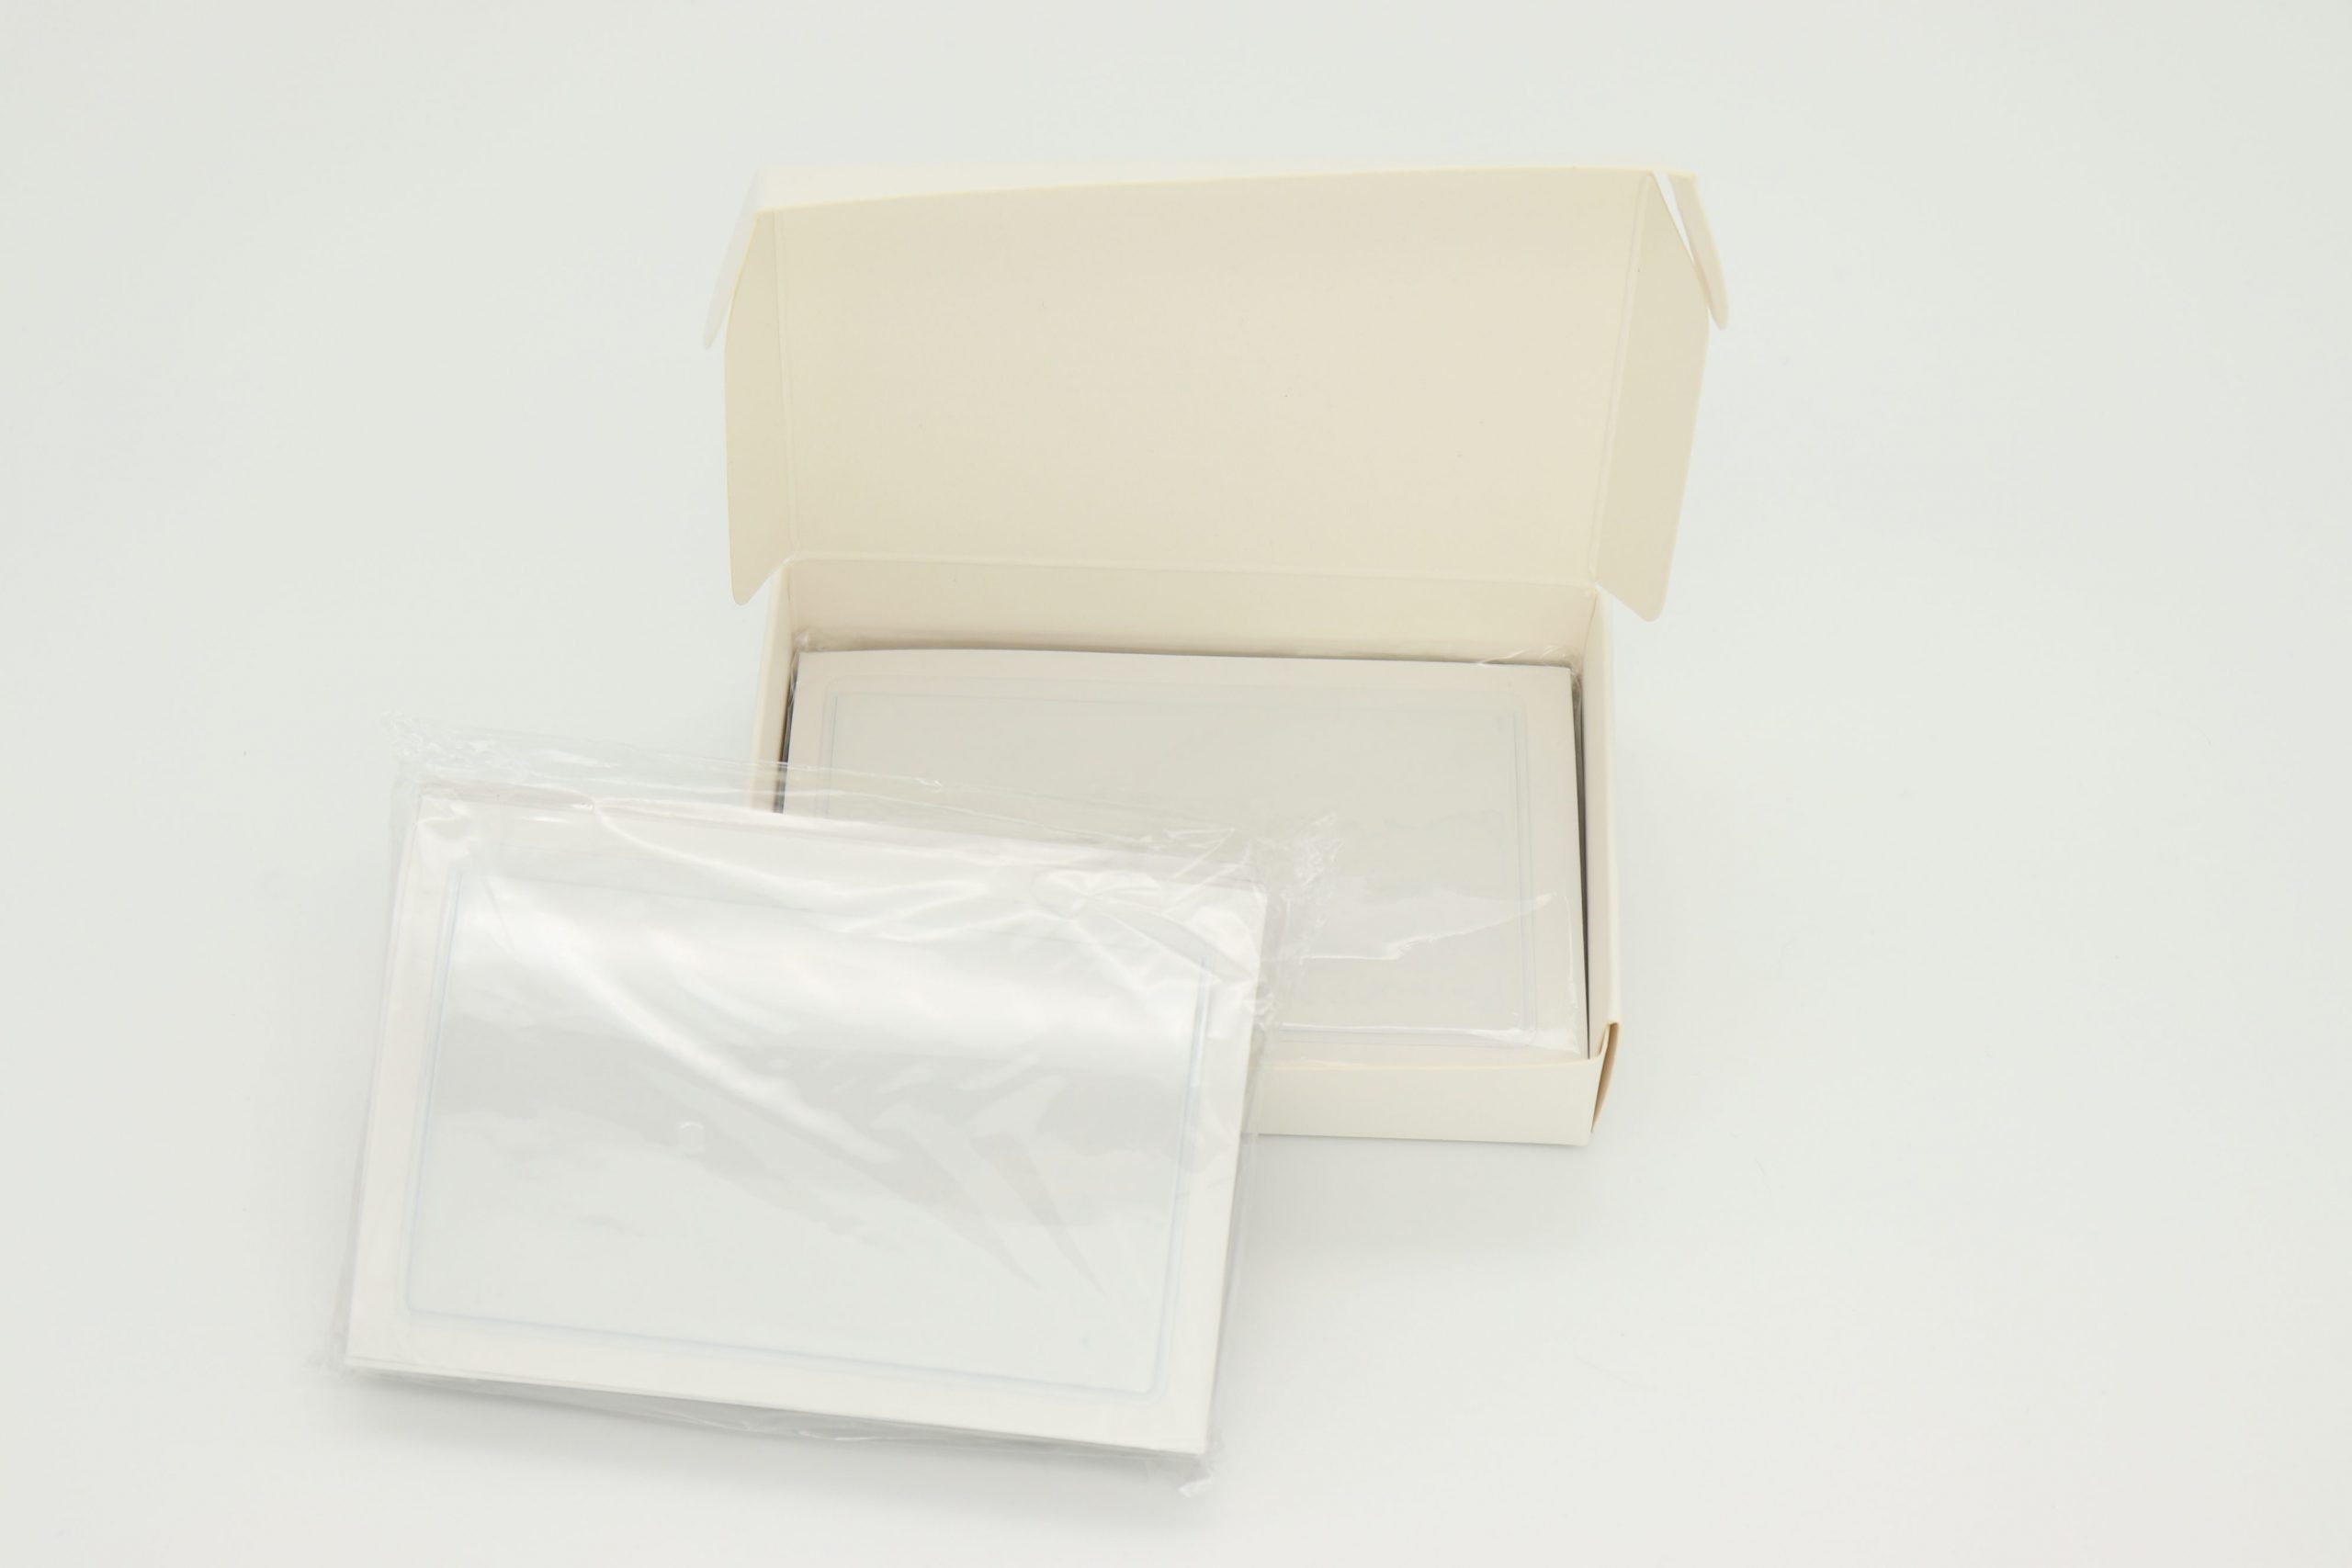 2 x 3.5 Clear Adhesive Business Card Holder Pocket Sleeves - ProSimpli